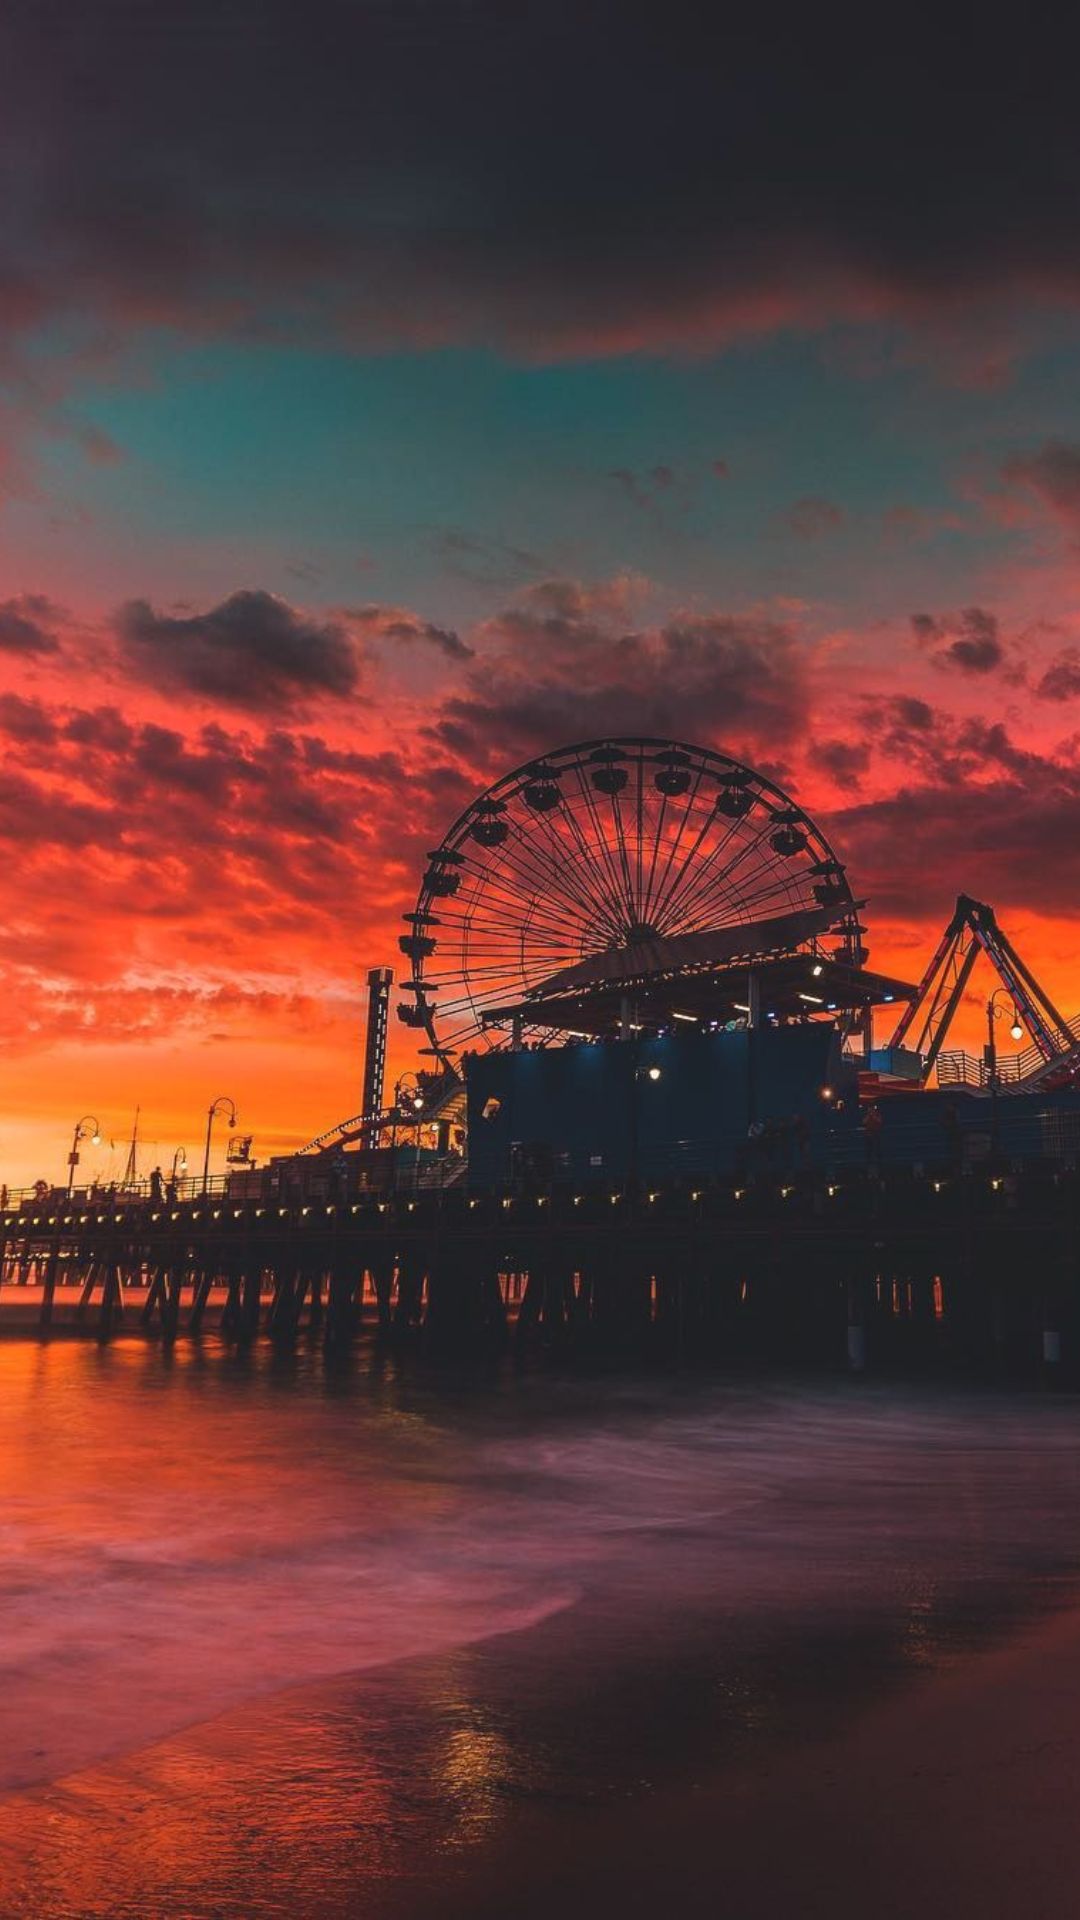 IPhone wallpaper of a sunset over a pier with a ferris wheel - California